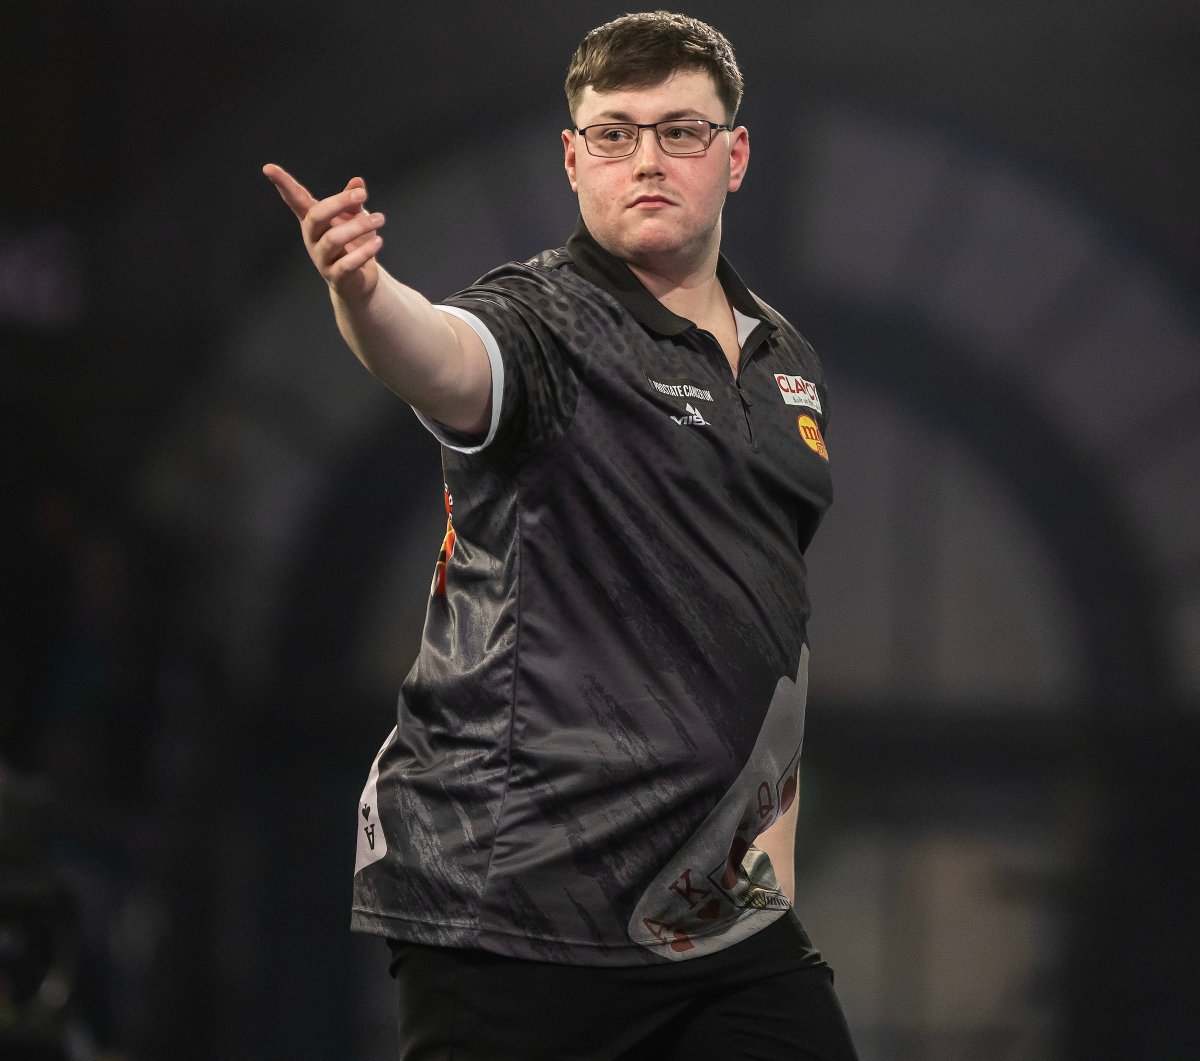 WHAT A WAY TO WIN! Dylan Slevin pinned a nine-dart finish in his match against Cameron Menzies in ET8 qualifying. Slev came through 6-4. Well done Dylan!